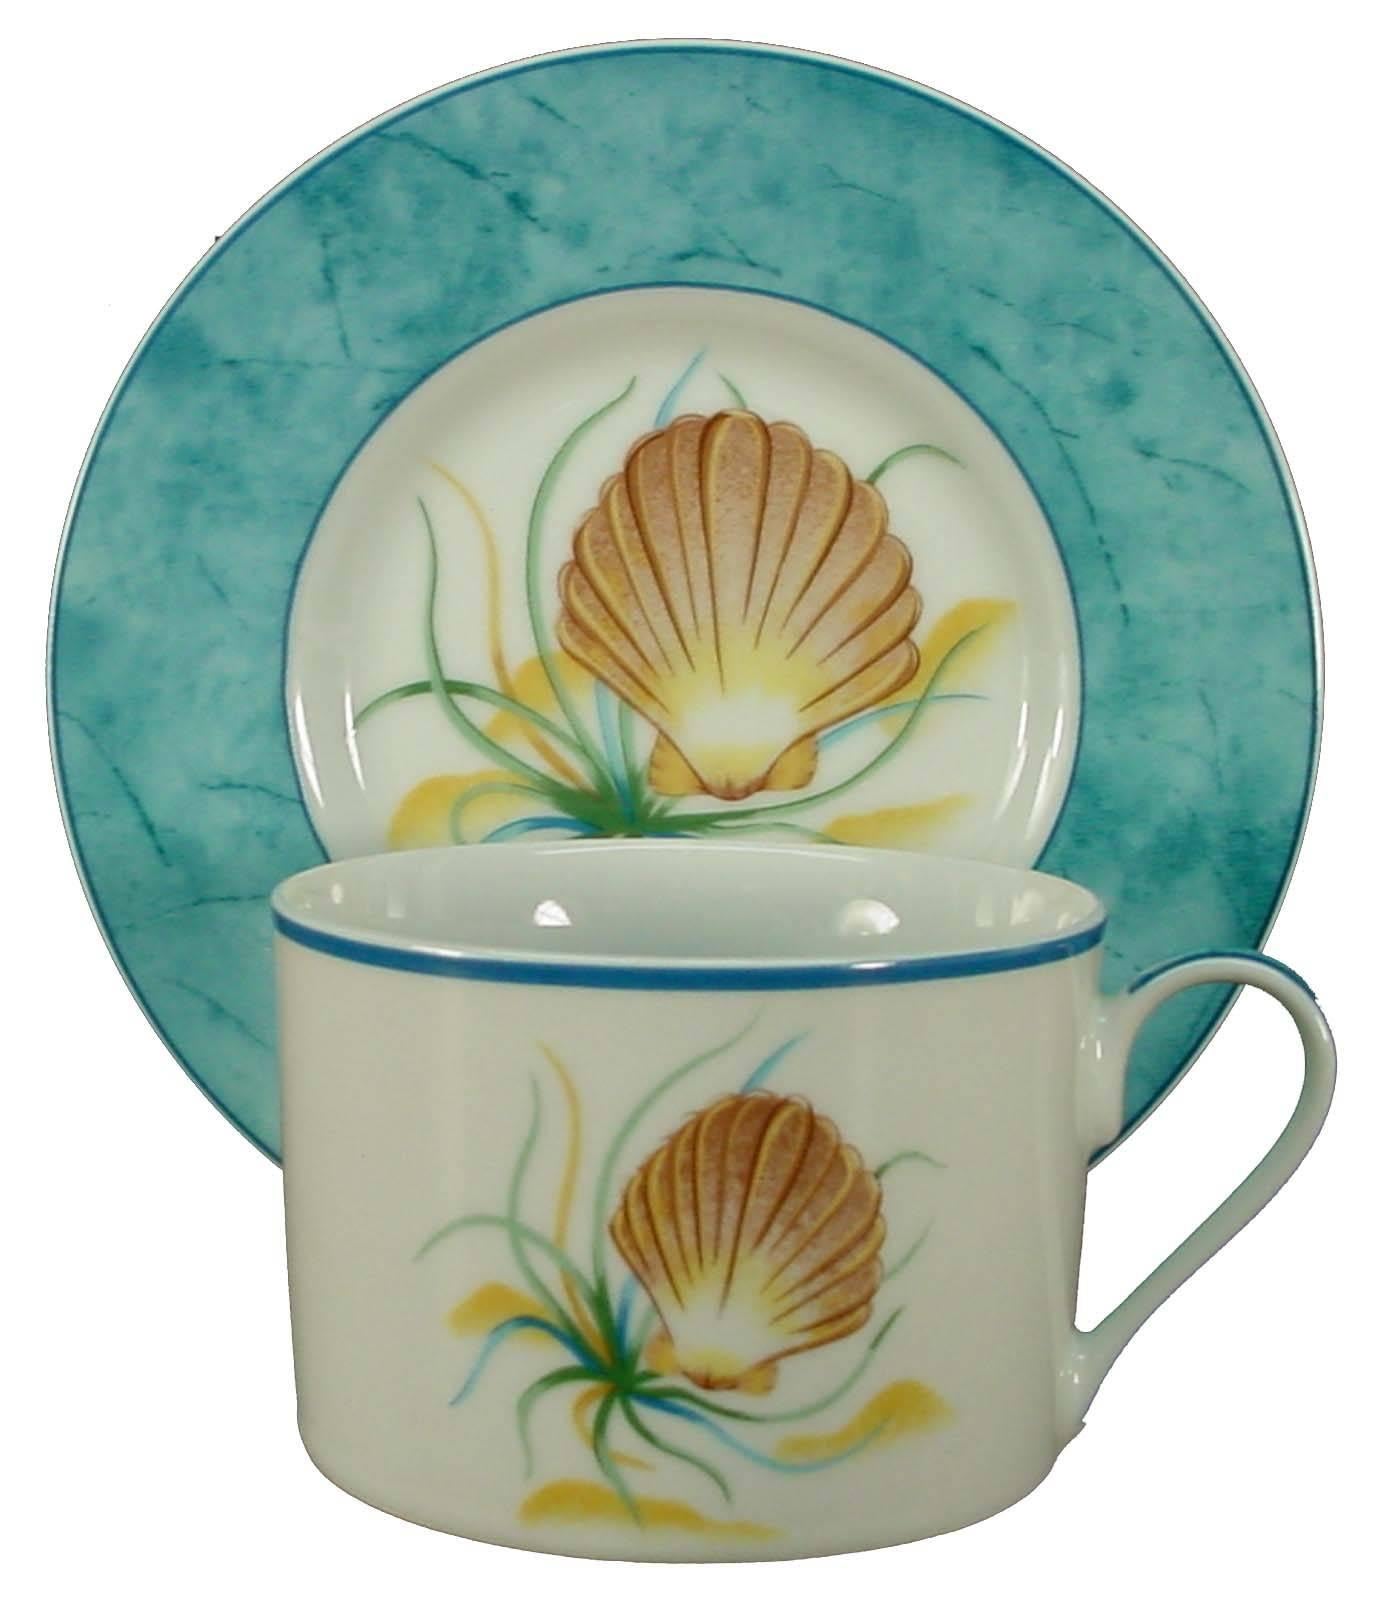 NATIONAL WILDLIFE FEDERATION china SEA SHELLS pattern 24-pc SET SERVICE

in great condition free from chips, cracks, break, stain, or discoloration and with only a minimum of use. 

• Includes 2 Cup, 4 Saucer/Bread Plate, 6 Dinner Plate, 6 Salad